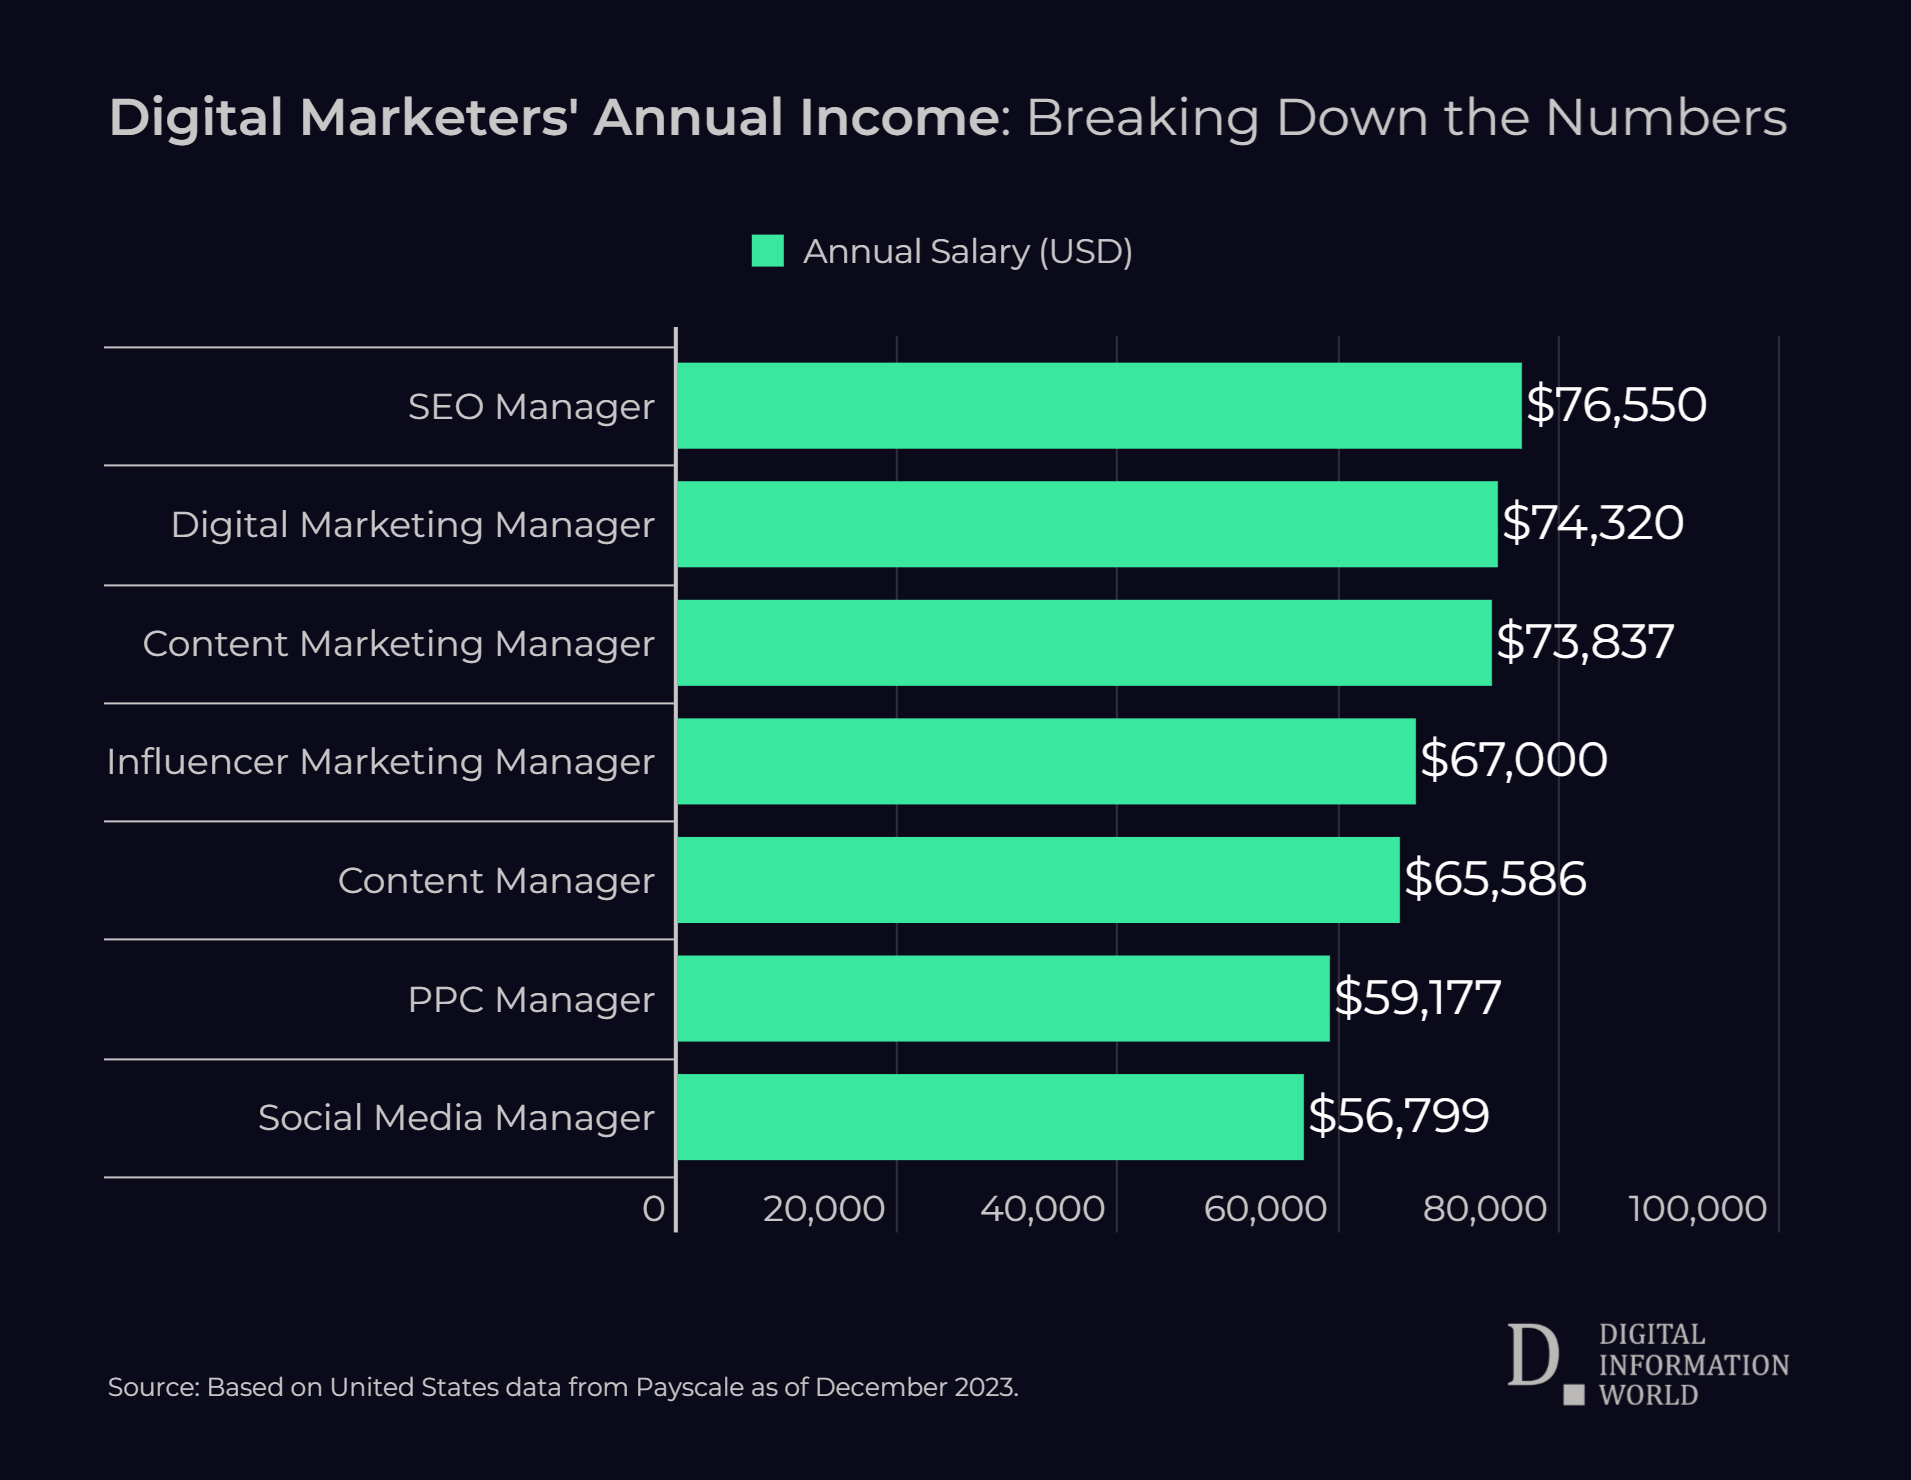 Digital Marketers' Annual Income: Breaking Down the Numbers